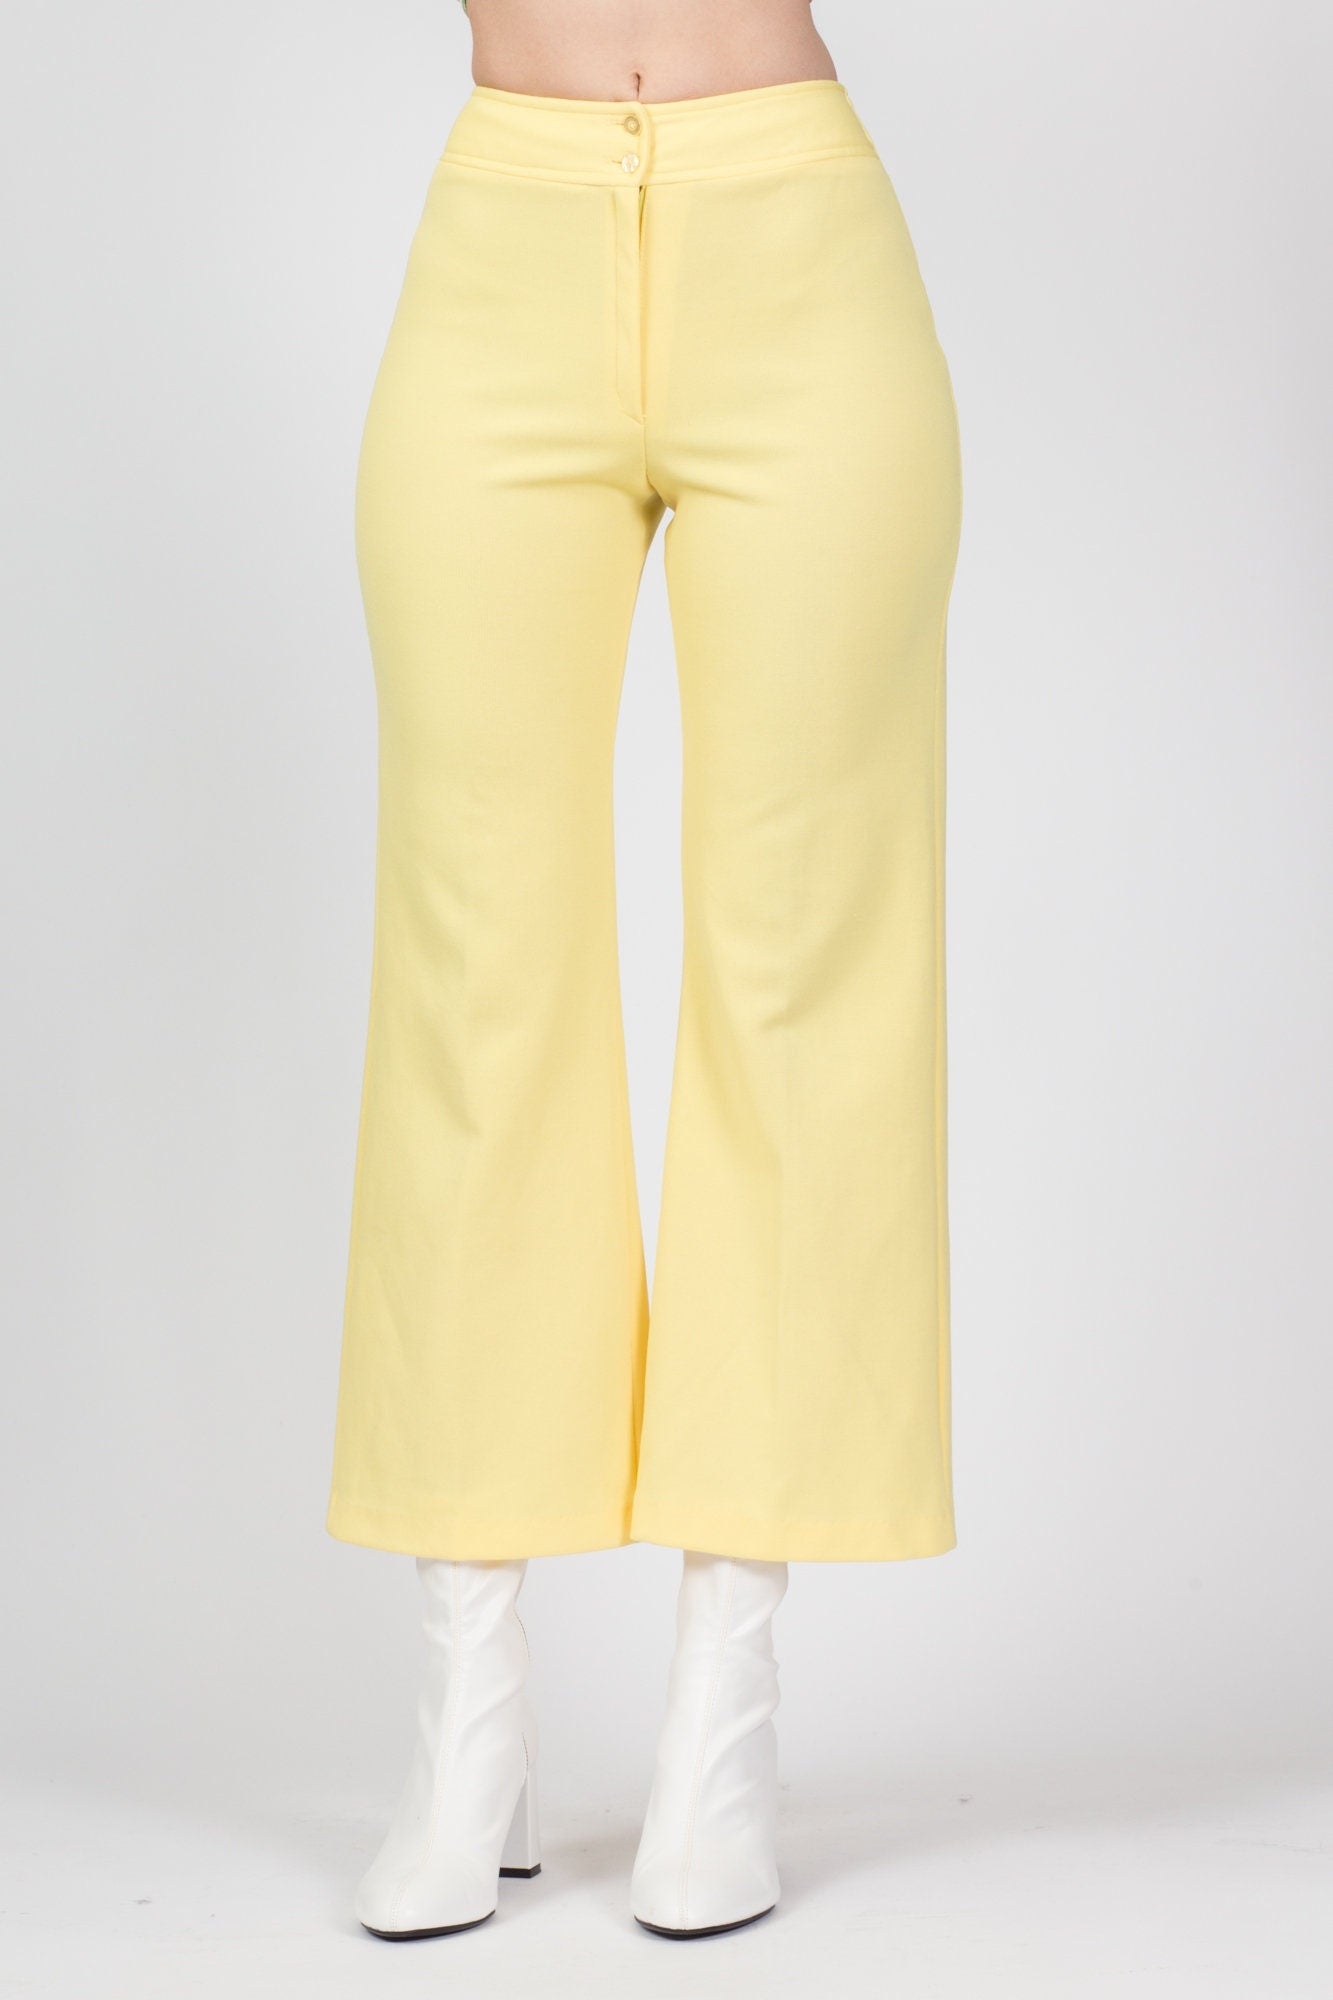 70s Yellow Flared Pants - Extra Small, 24